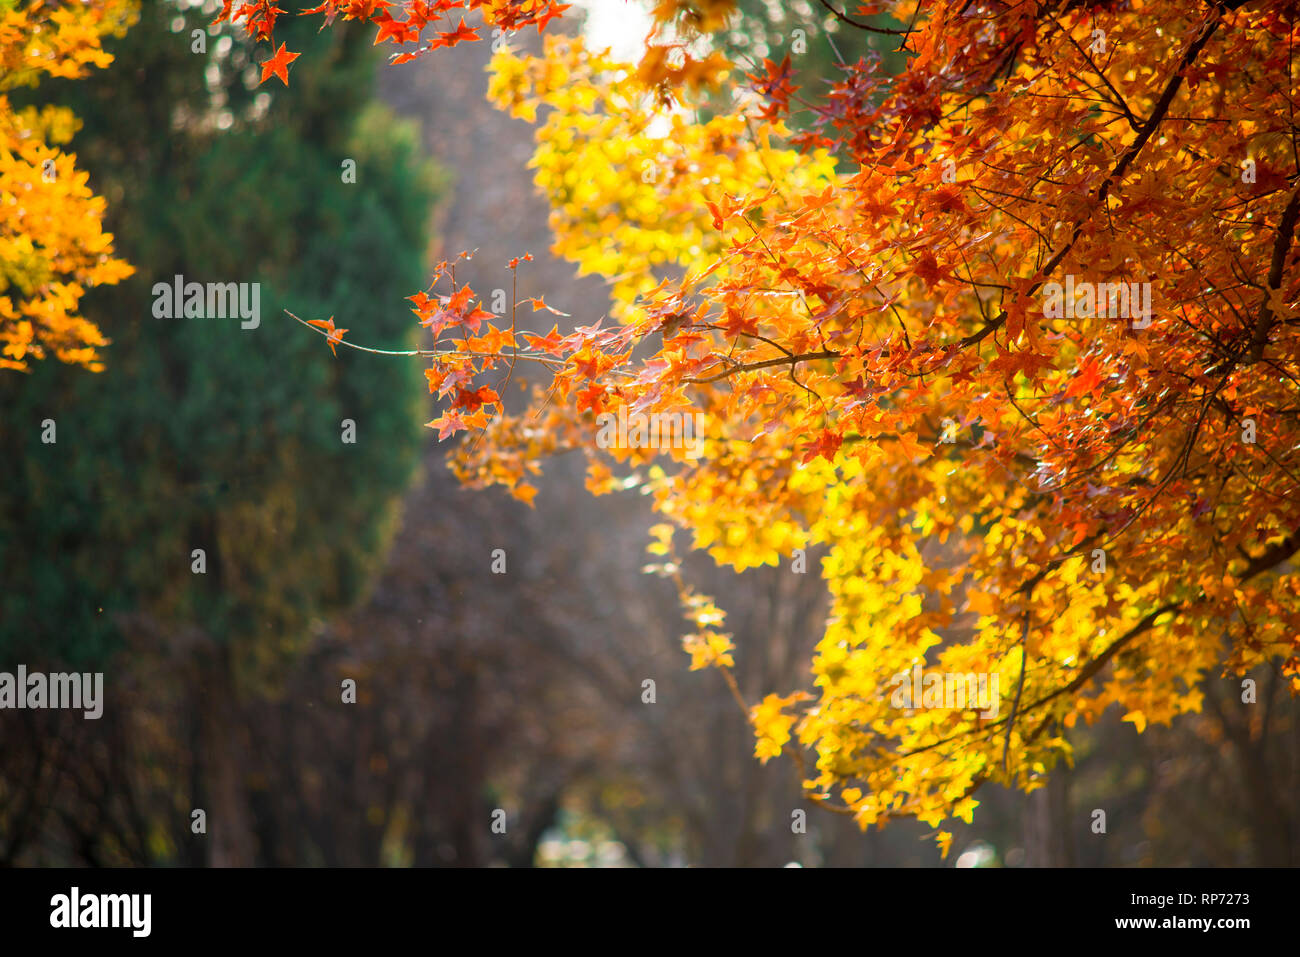 The background of yellow leaves in autumn Stock Photo